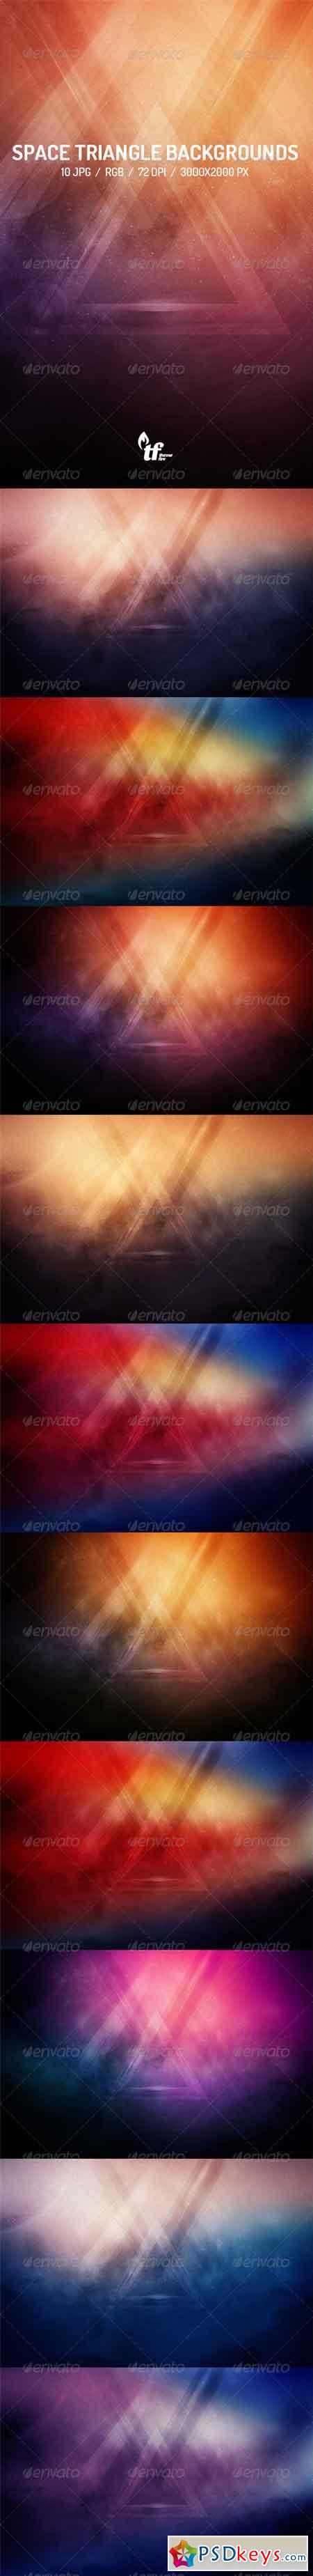 Space Triangle Backgrounds 7740567